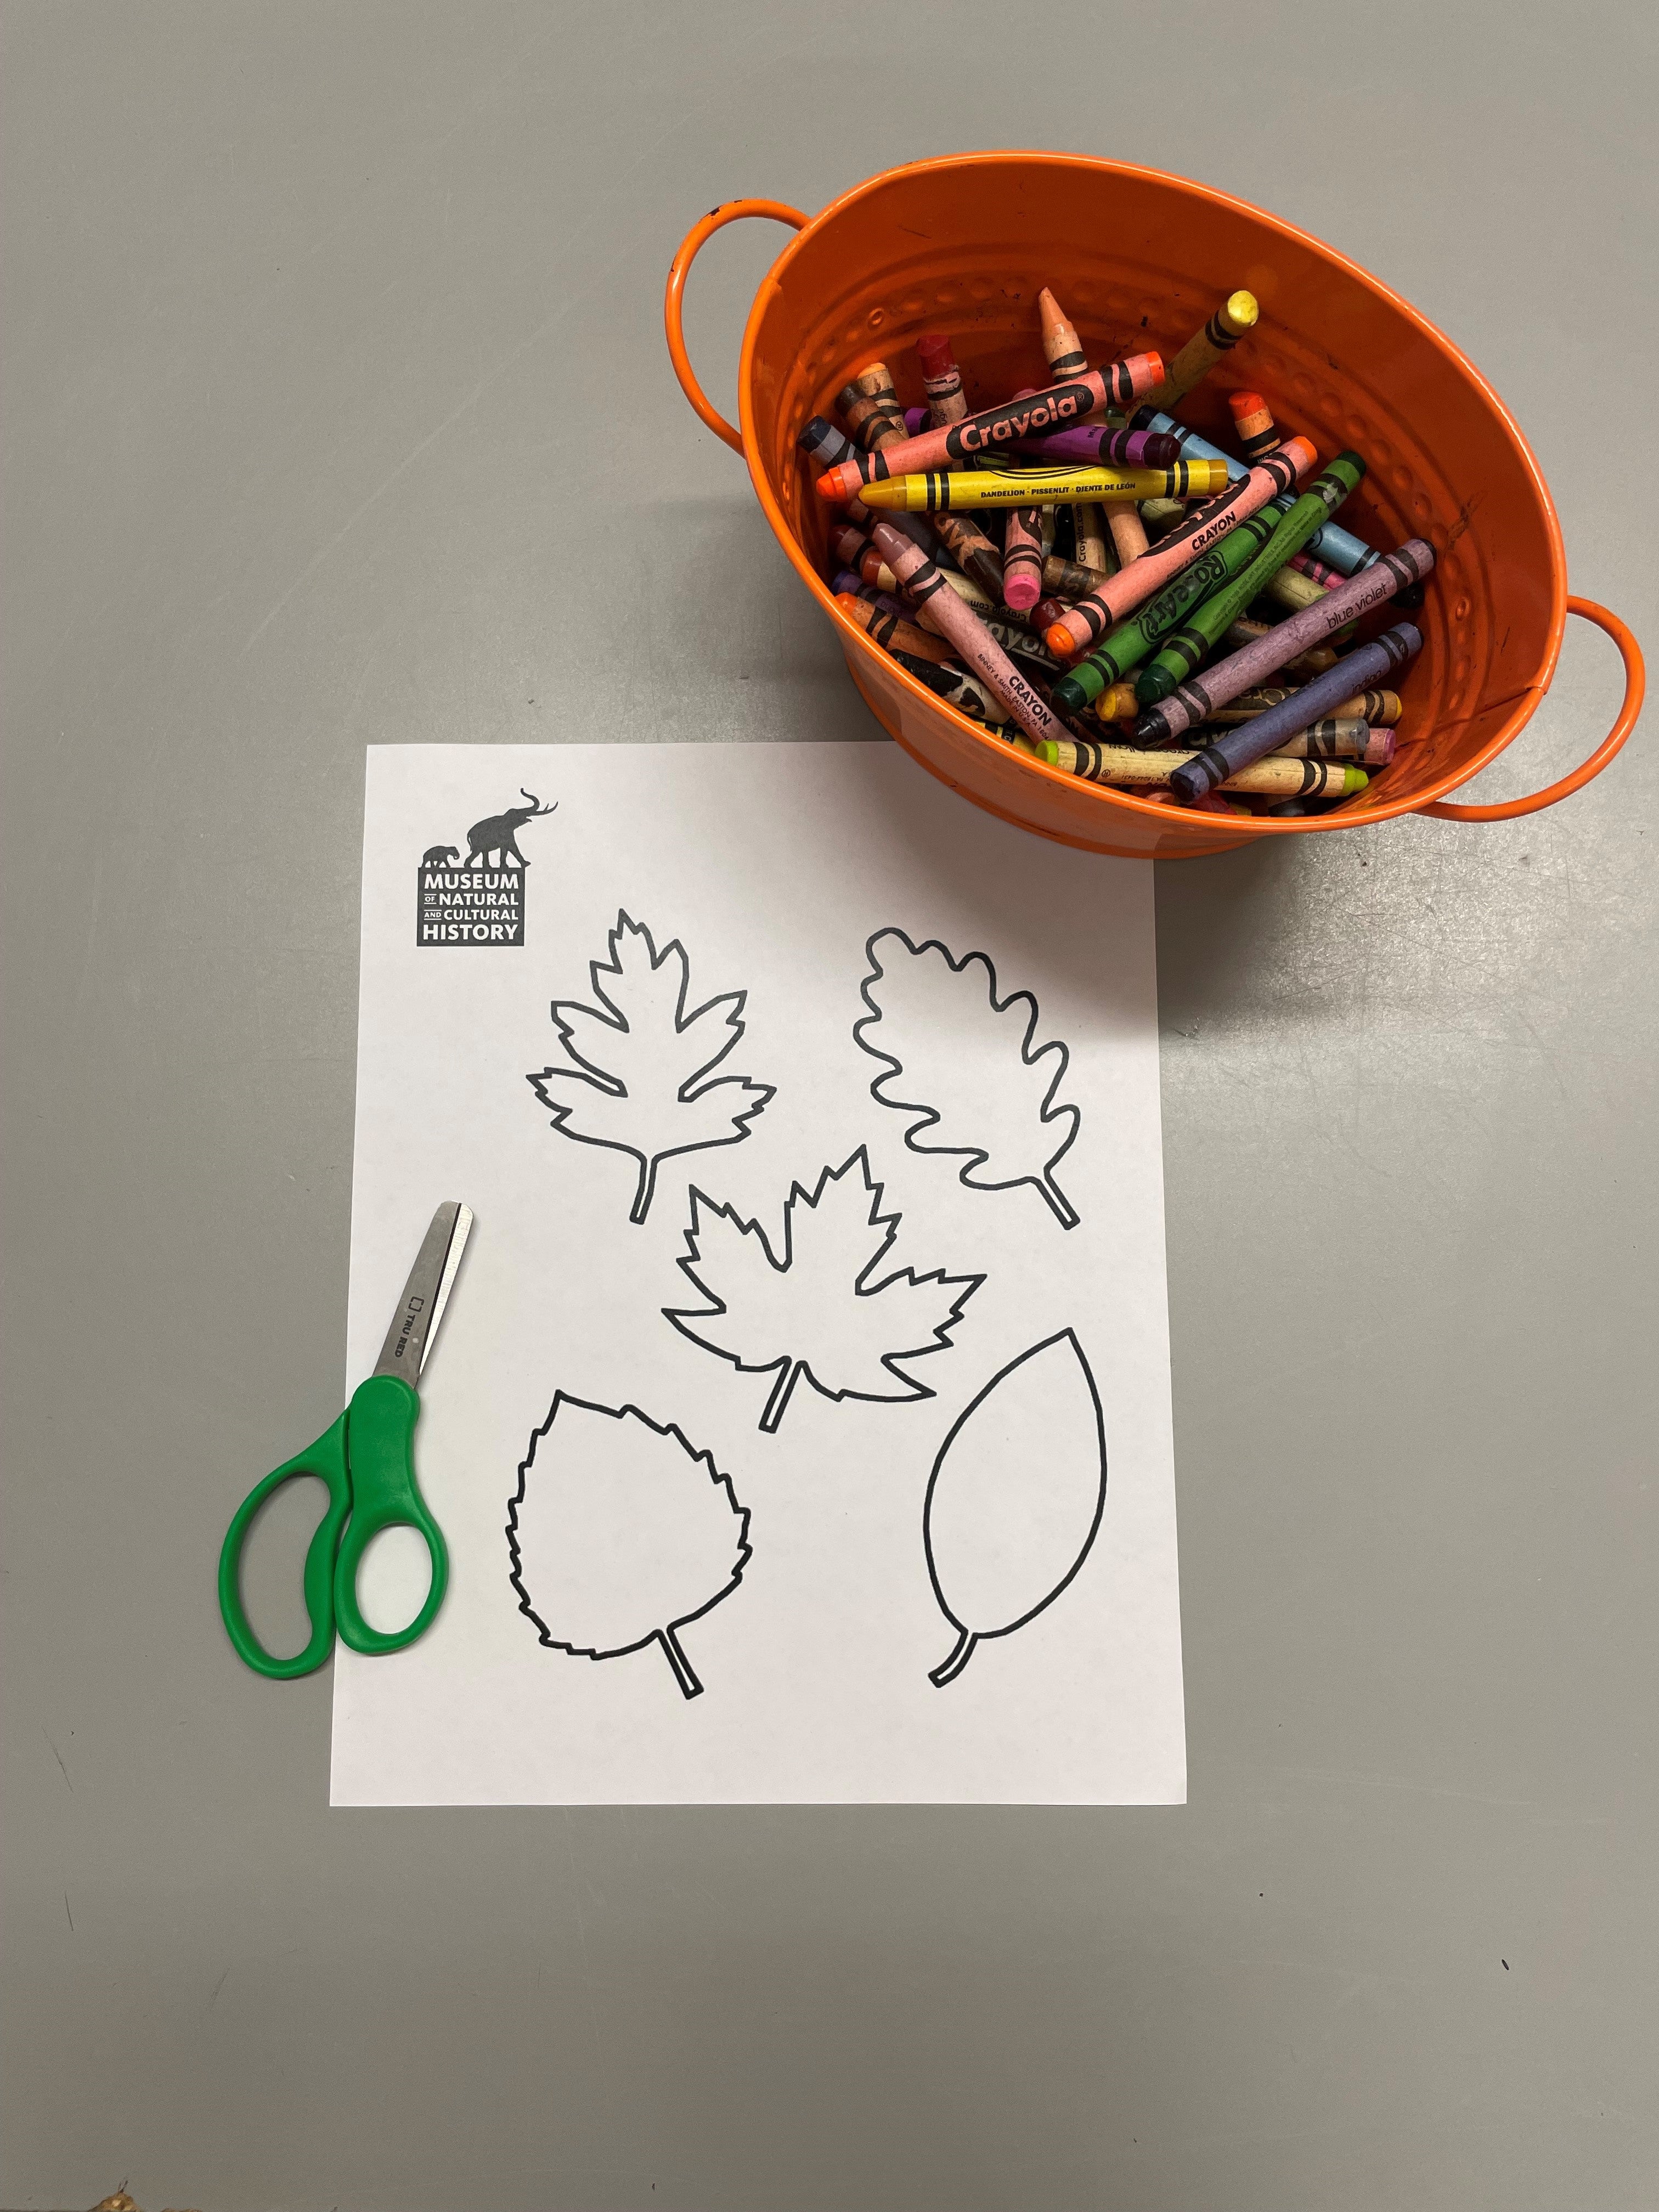 Lots of leaves activity with crayons and scissors